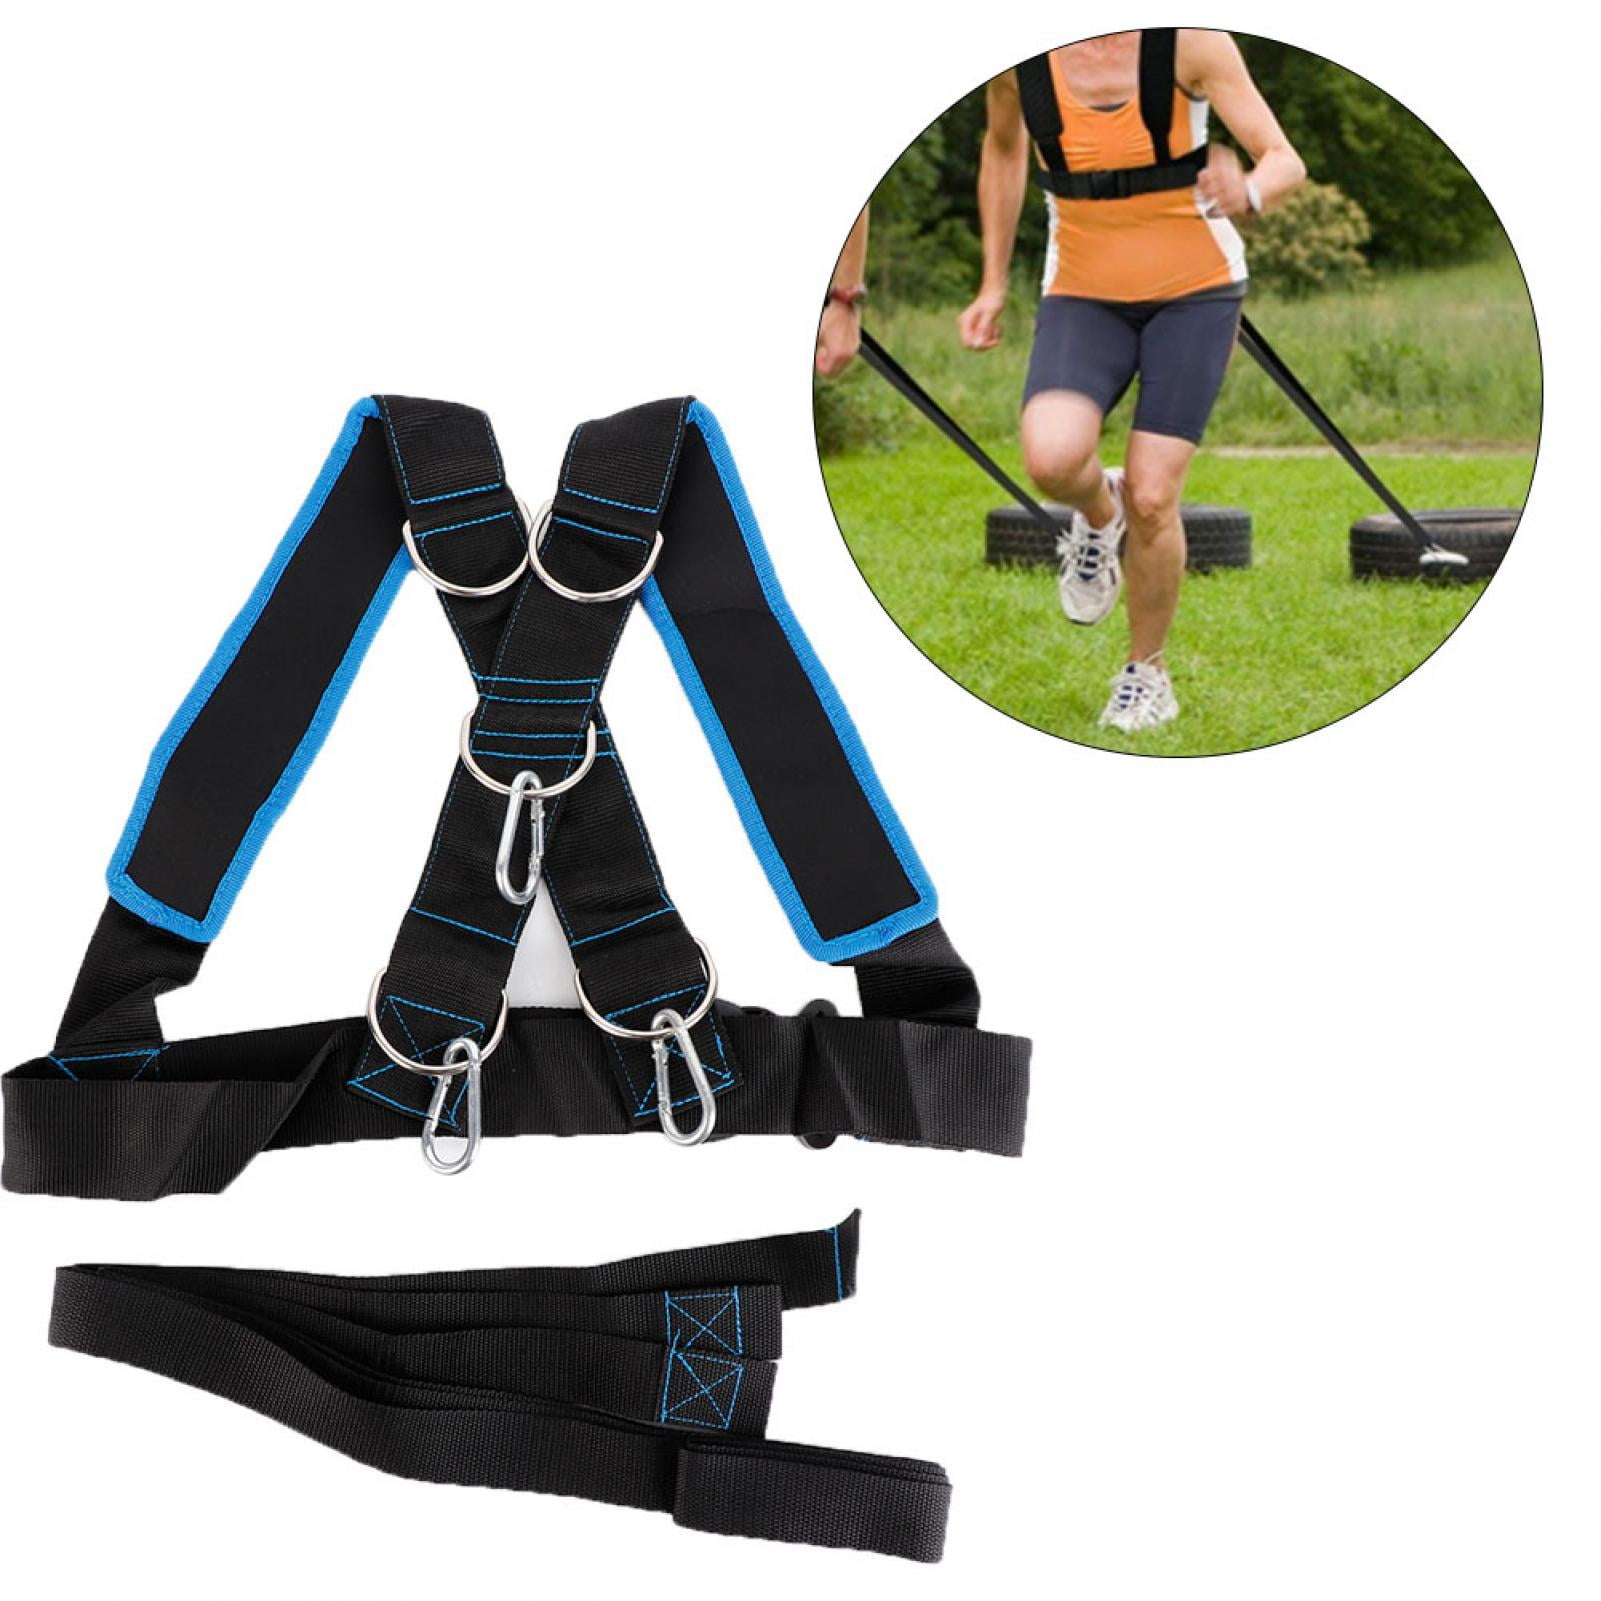 Sled Harness Tire Pulling Harness for Running Details about   Weight Bearing Shoulder Strap